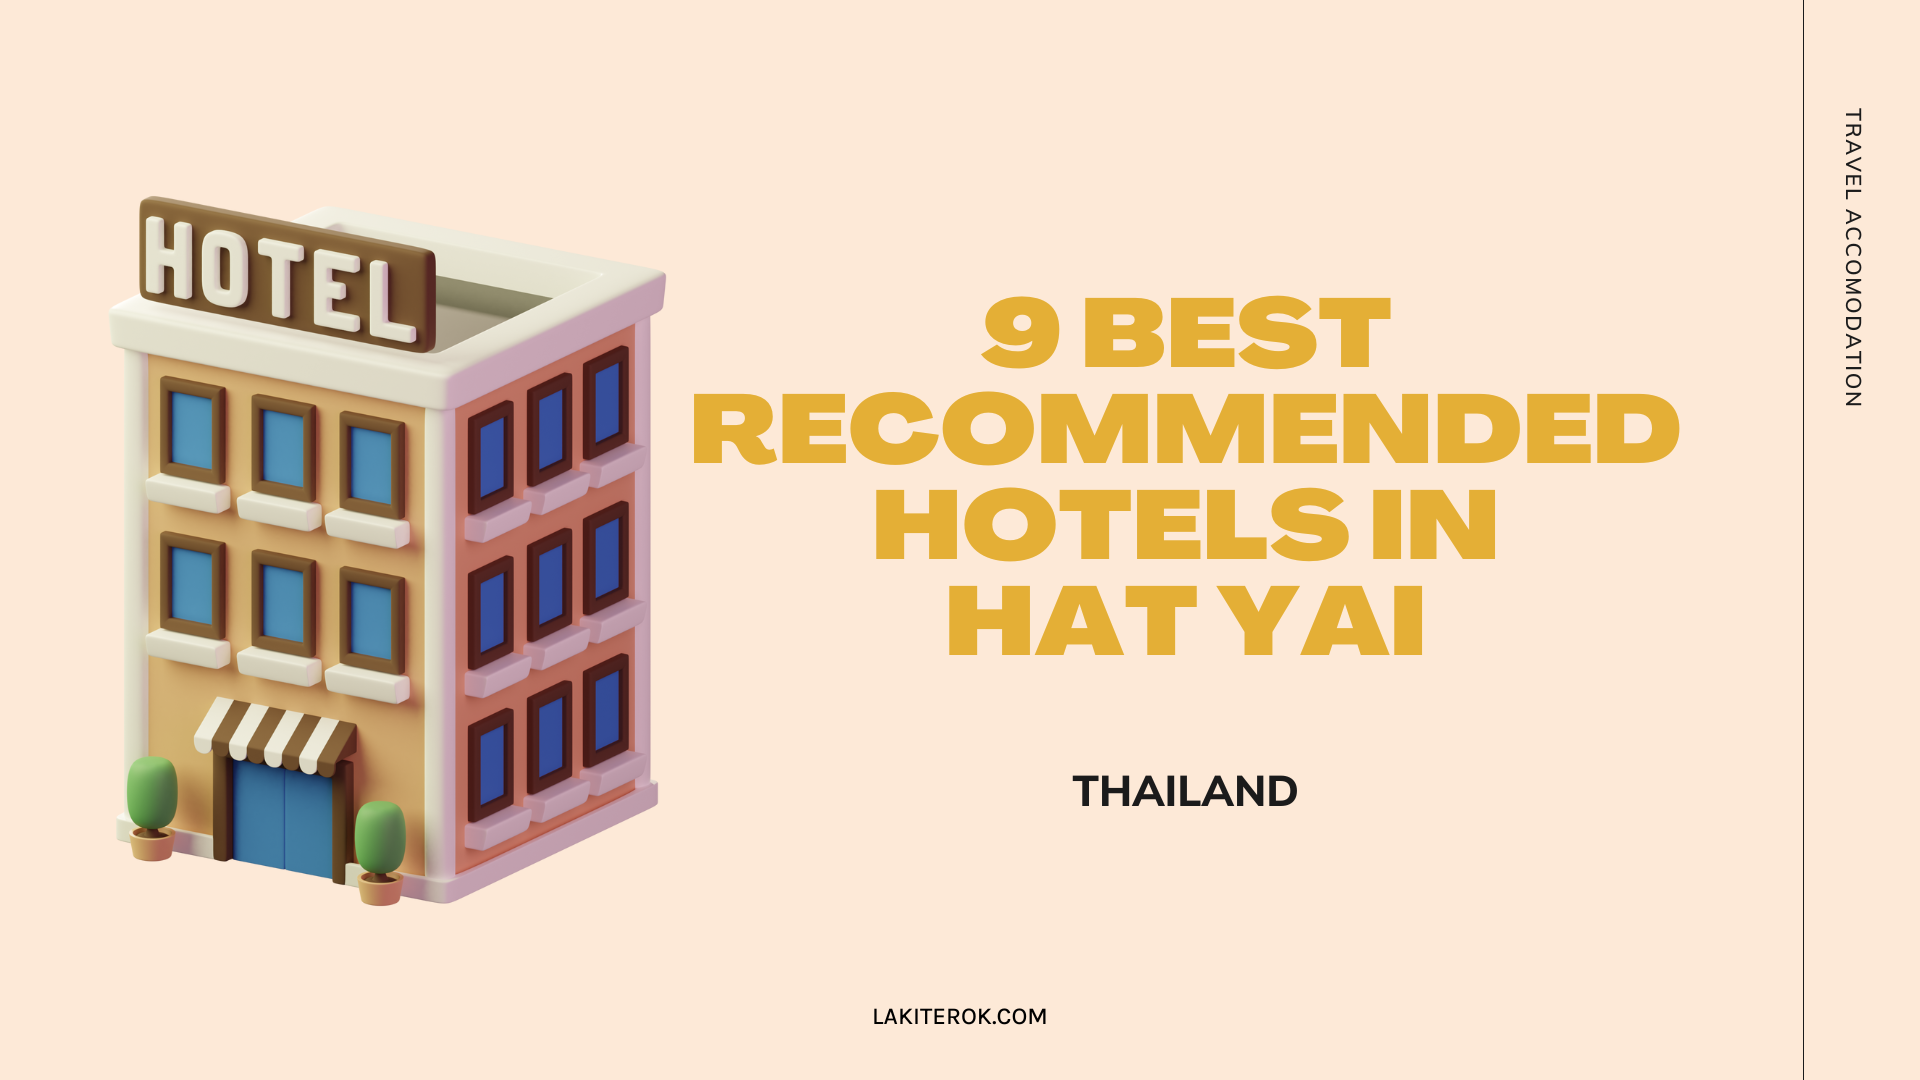 9 best recommended-hotels in hat yai thailand